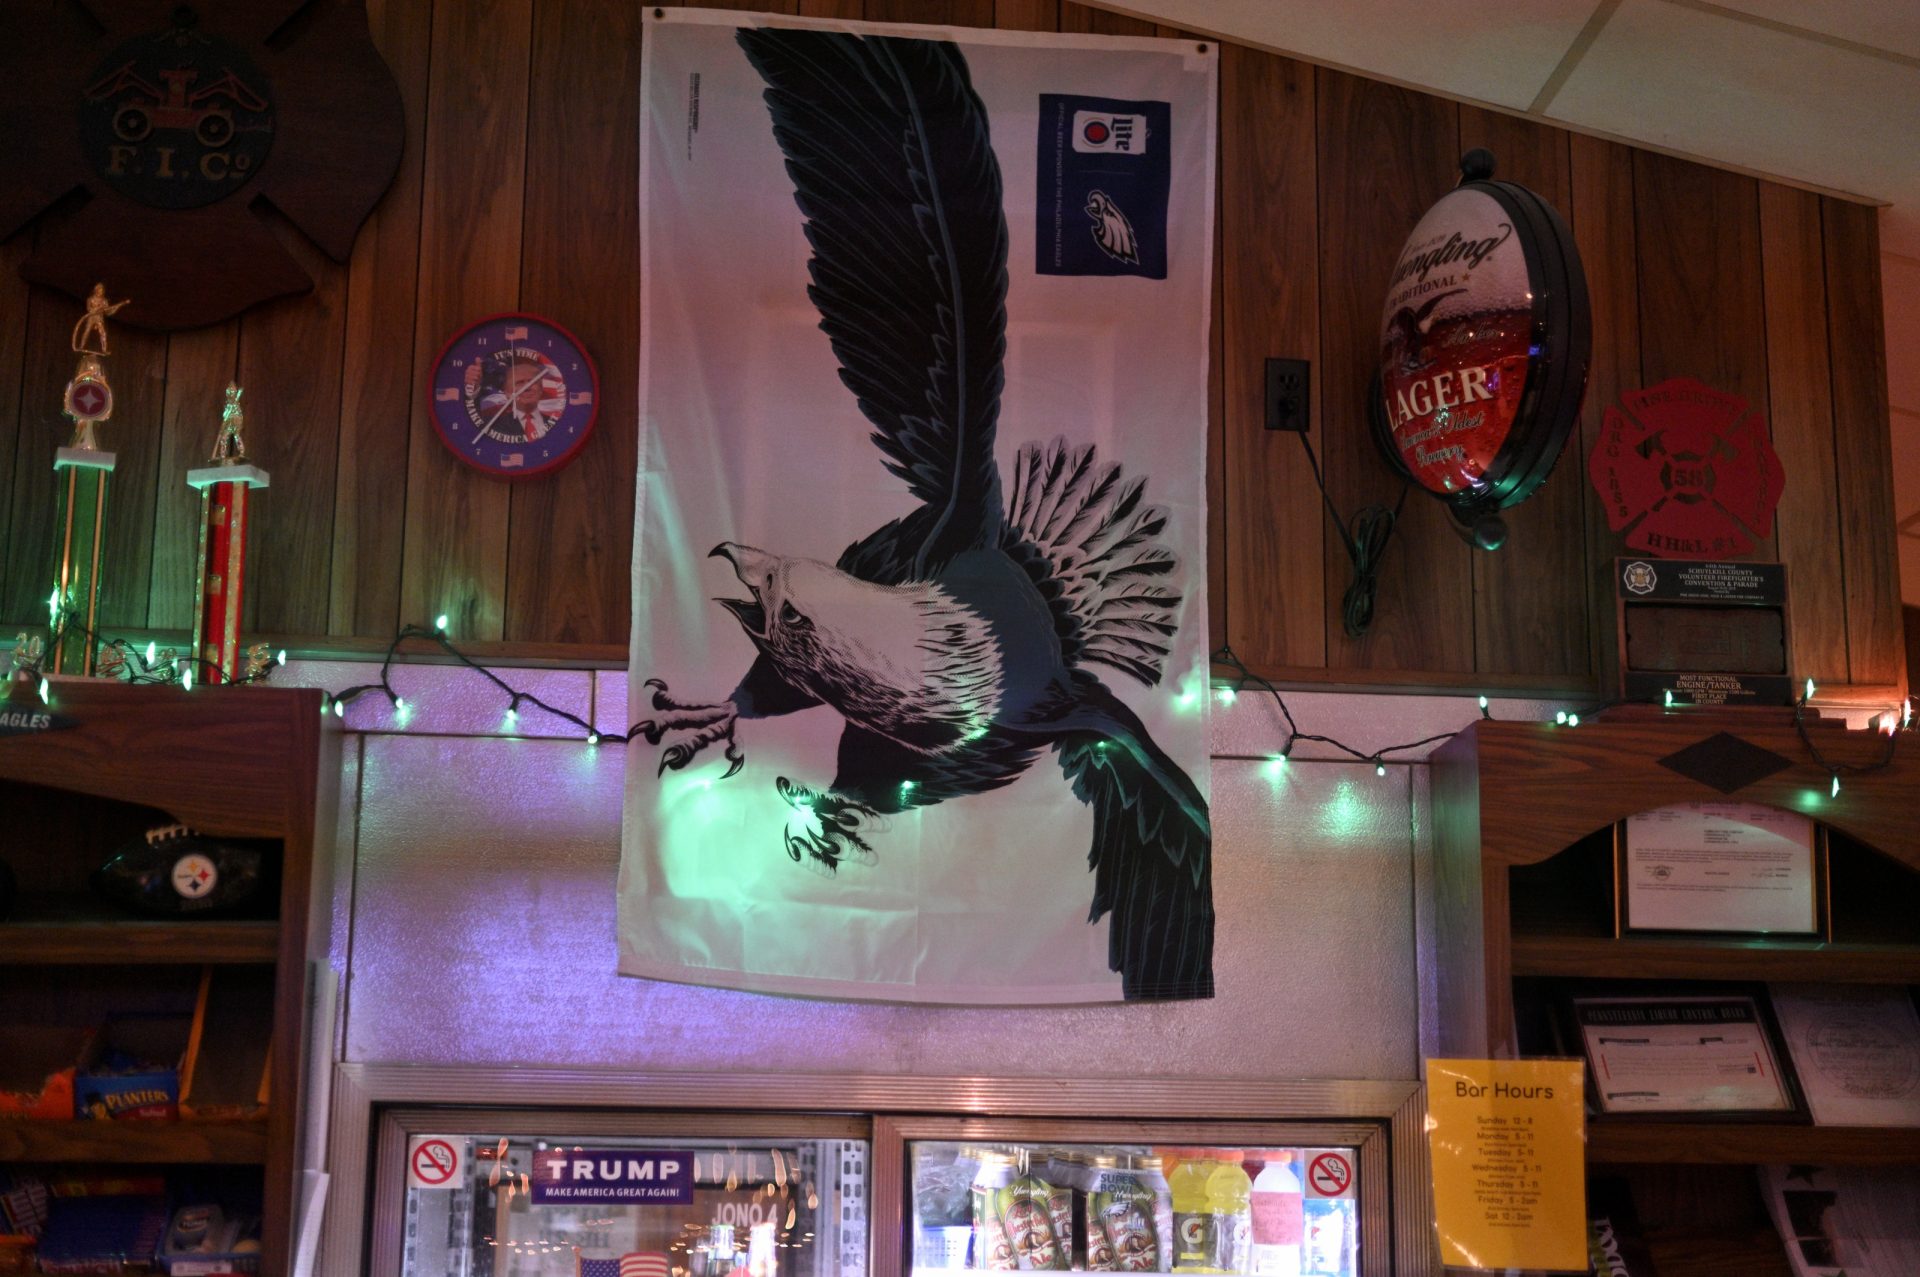 A sticker and clock in suport of President Donald Trump, as well as a large Eagles flag are found behind the bar of the Social Quarters of the Landingville Community Fire Company, in Landingville, PA, on December 15, 2019.